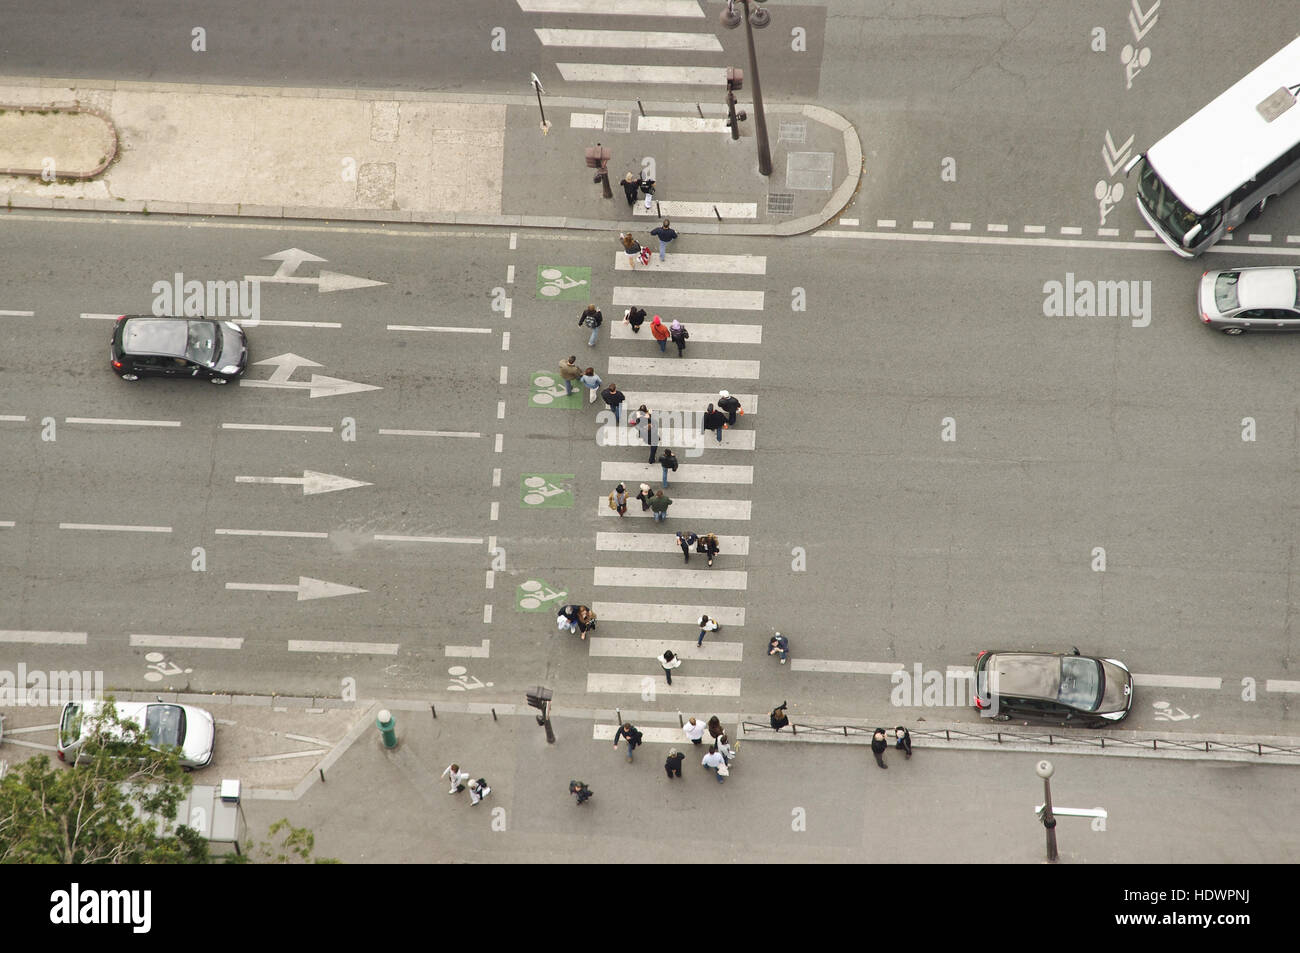 aerial view of pedestrian crossing on street Stock Photo